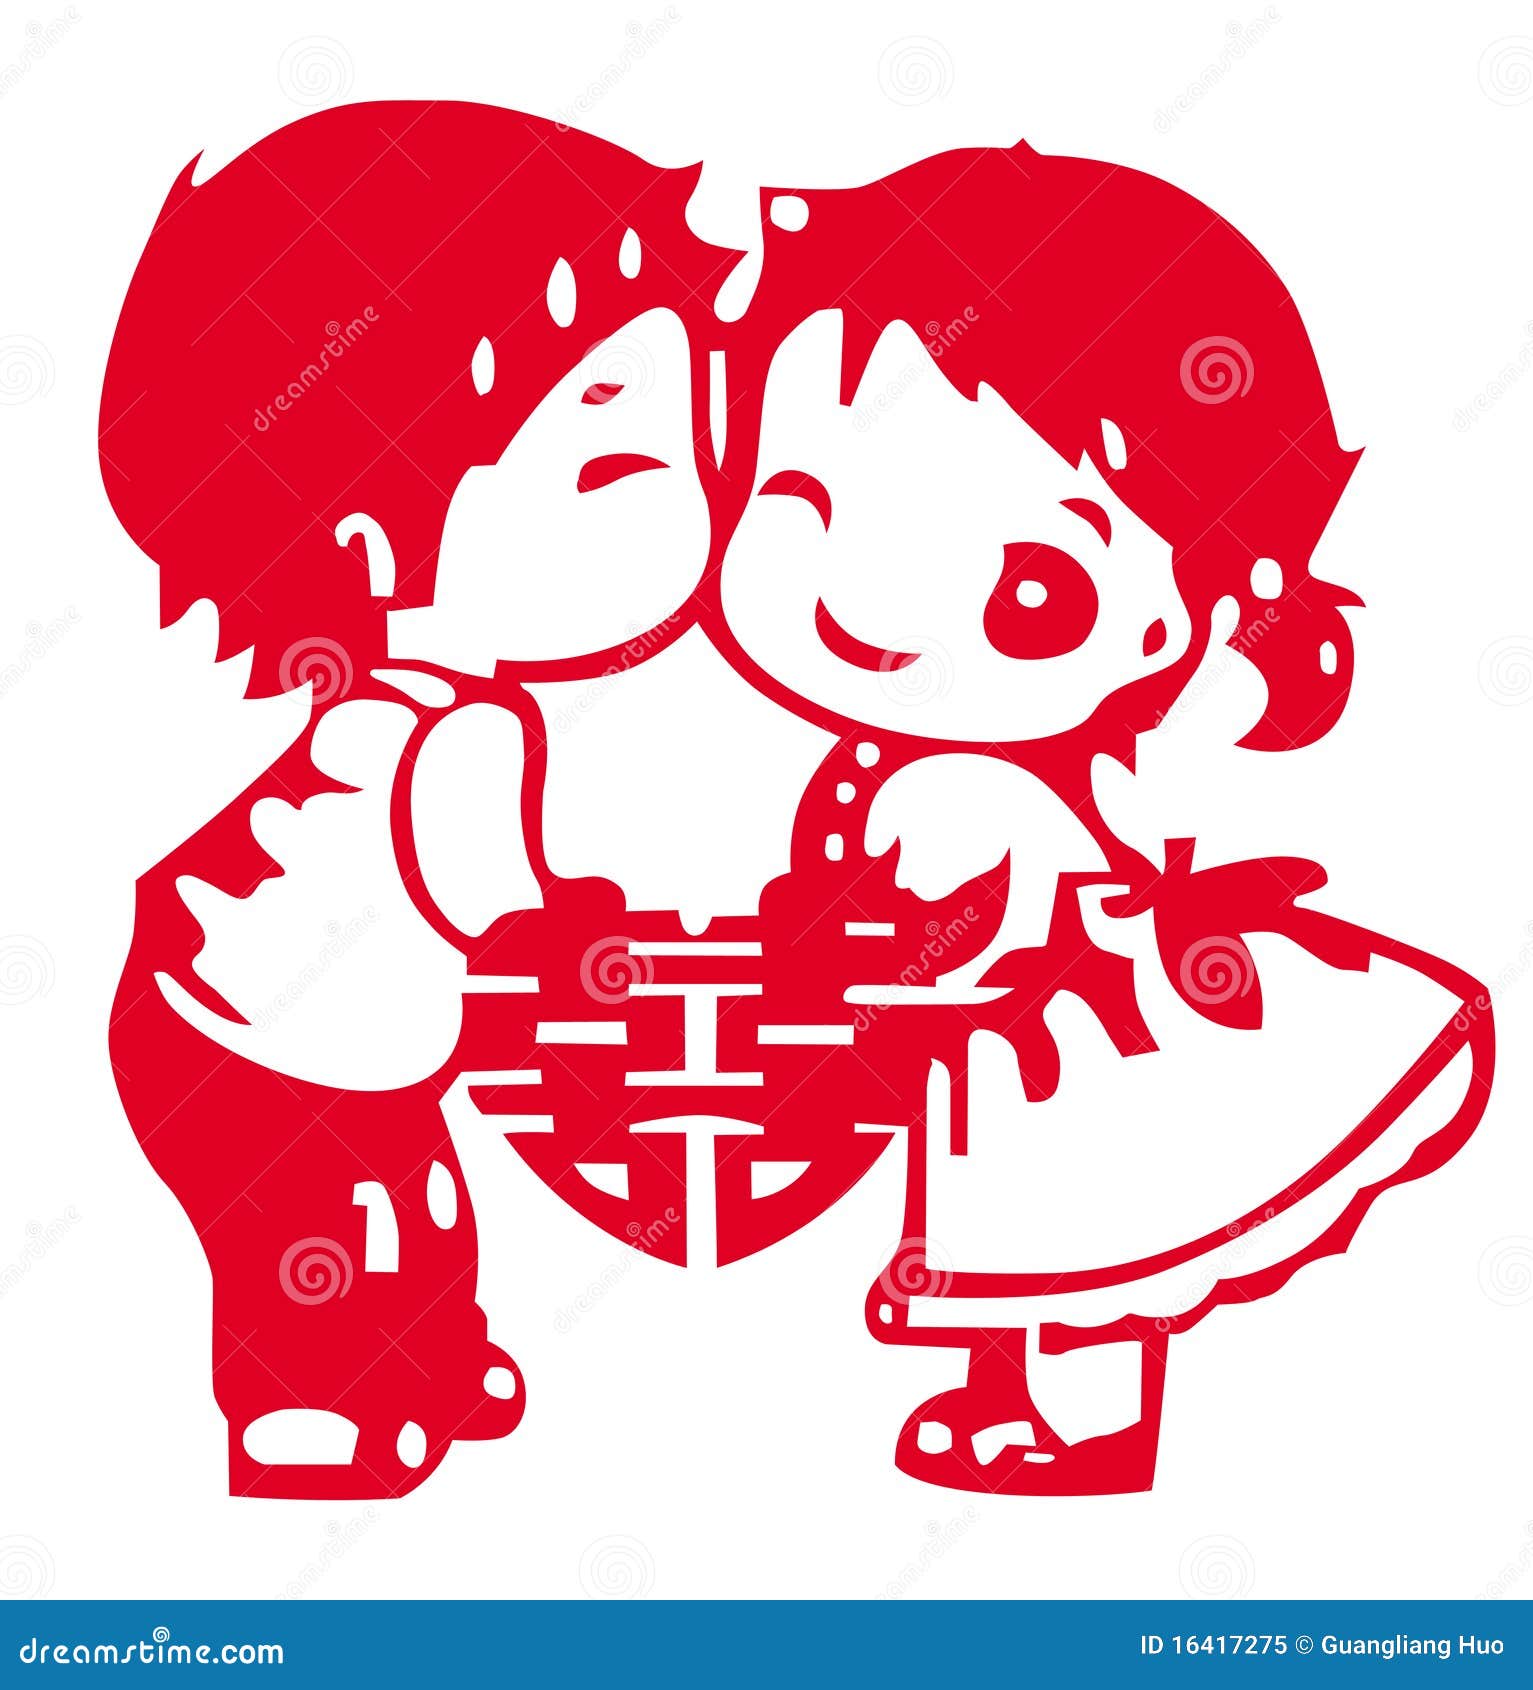 marriage clipart free download - photo #38